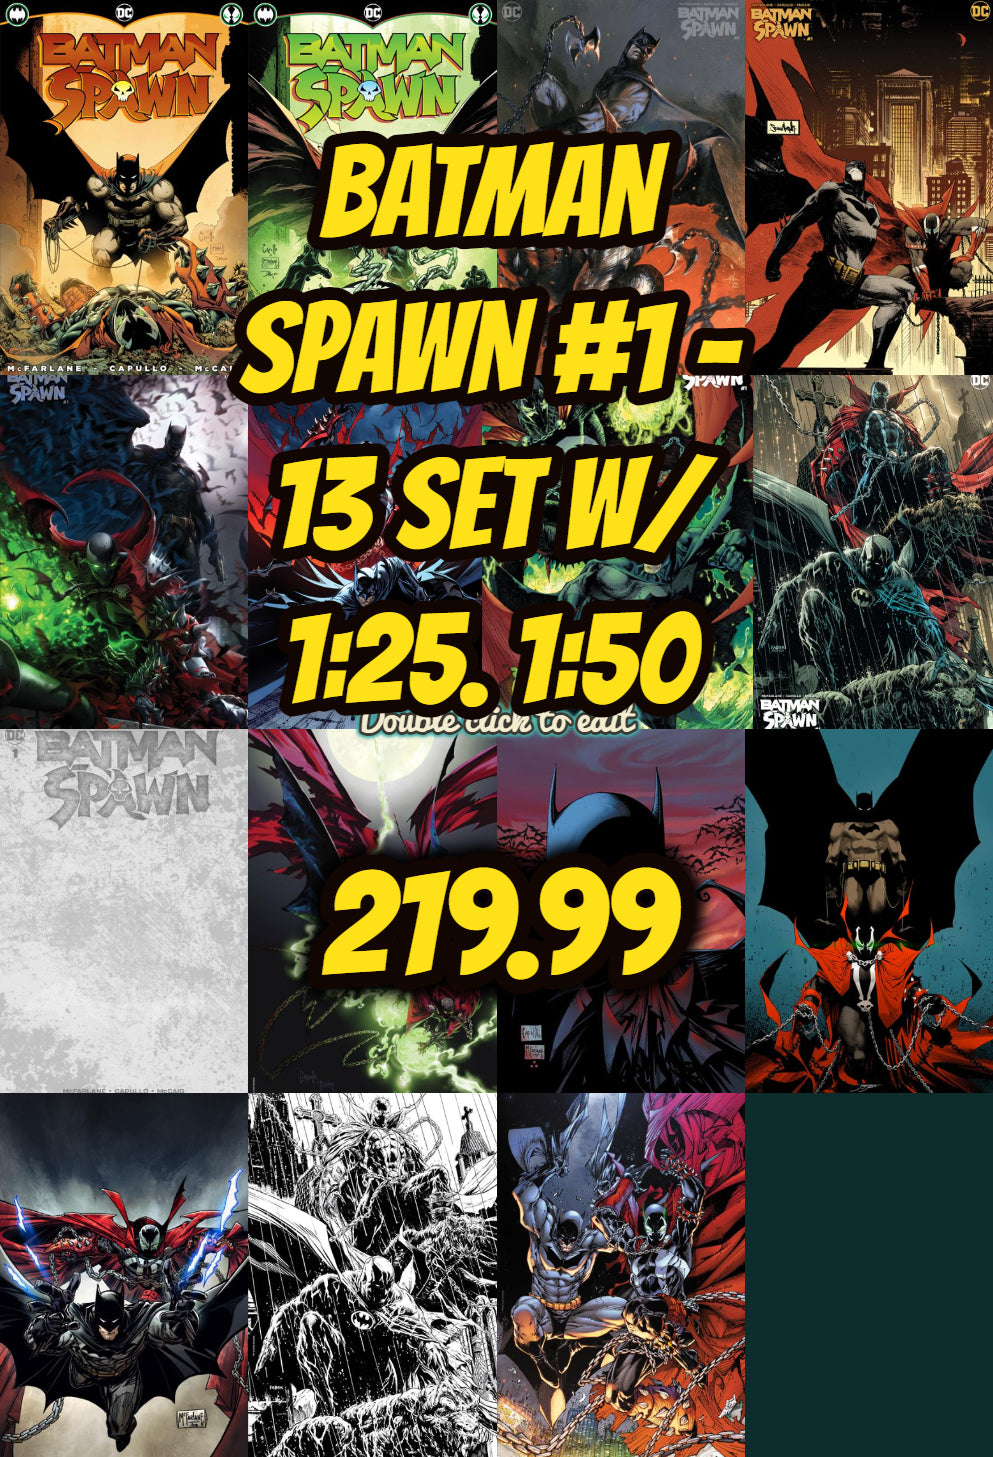 Batman Spawn #1 ALL 13 COVERS AND 1/25 1/50 RATIO SET.